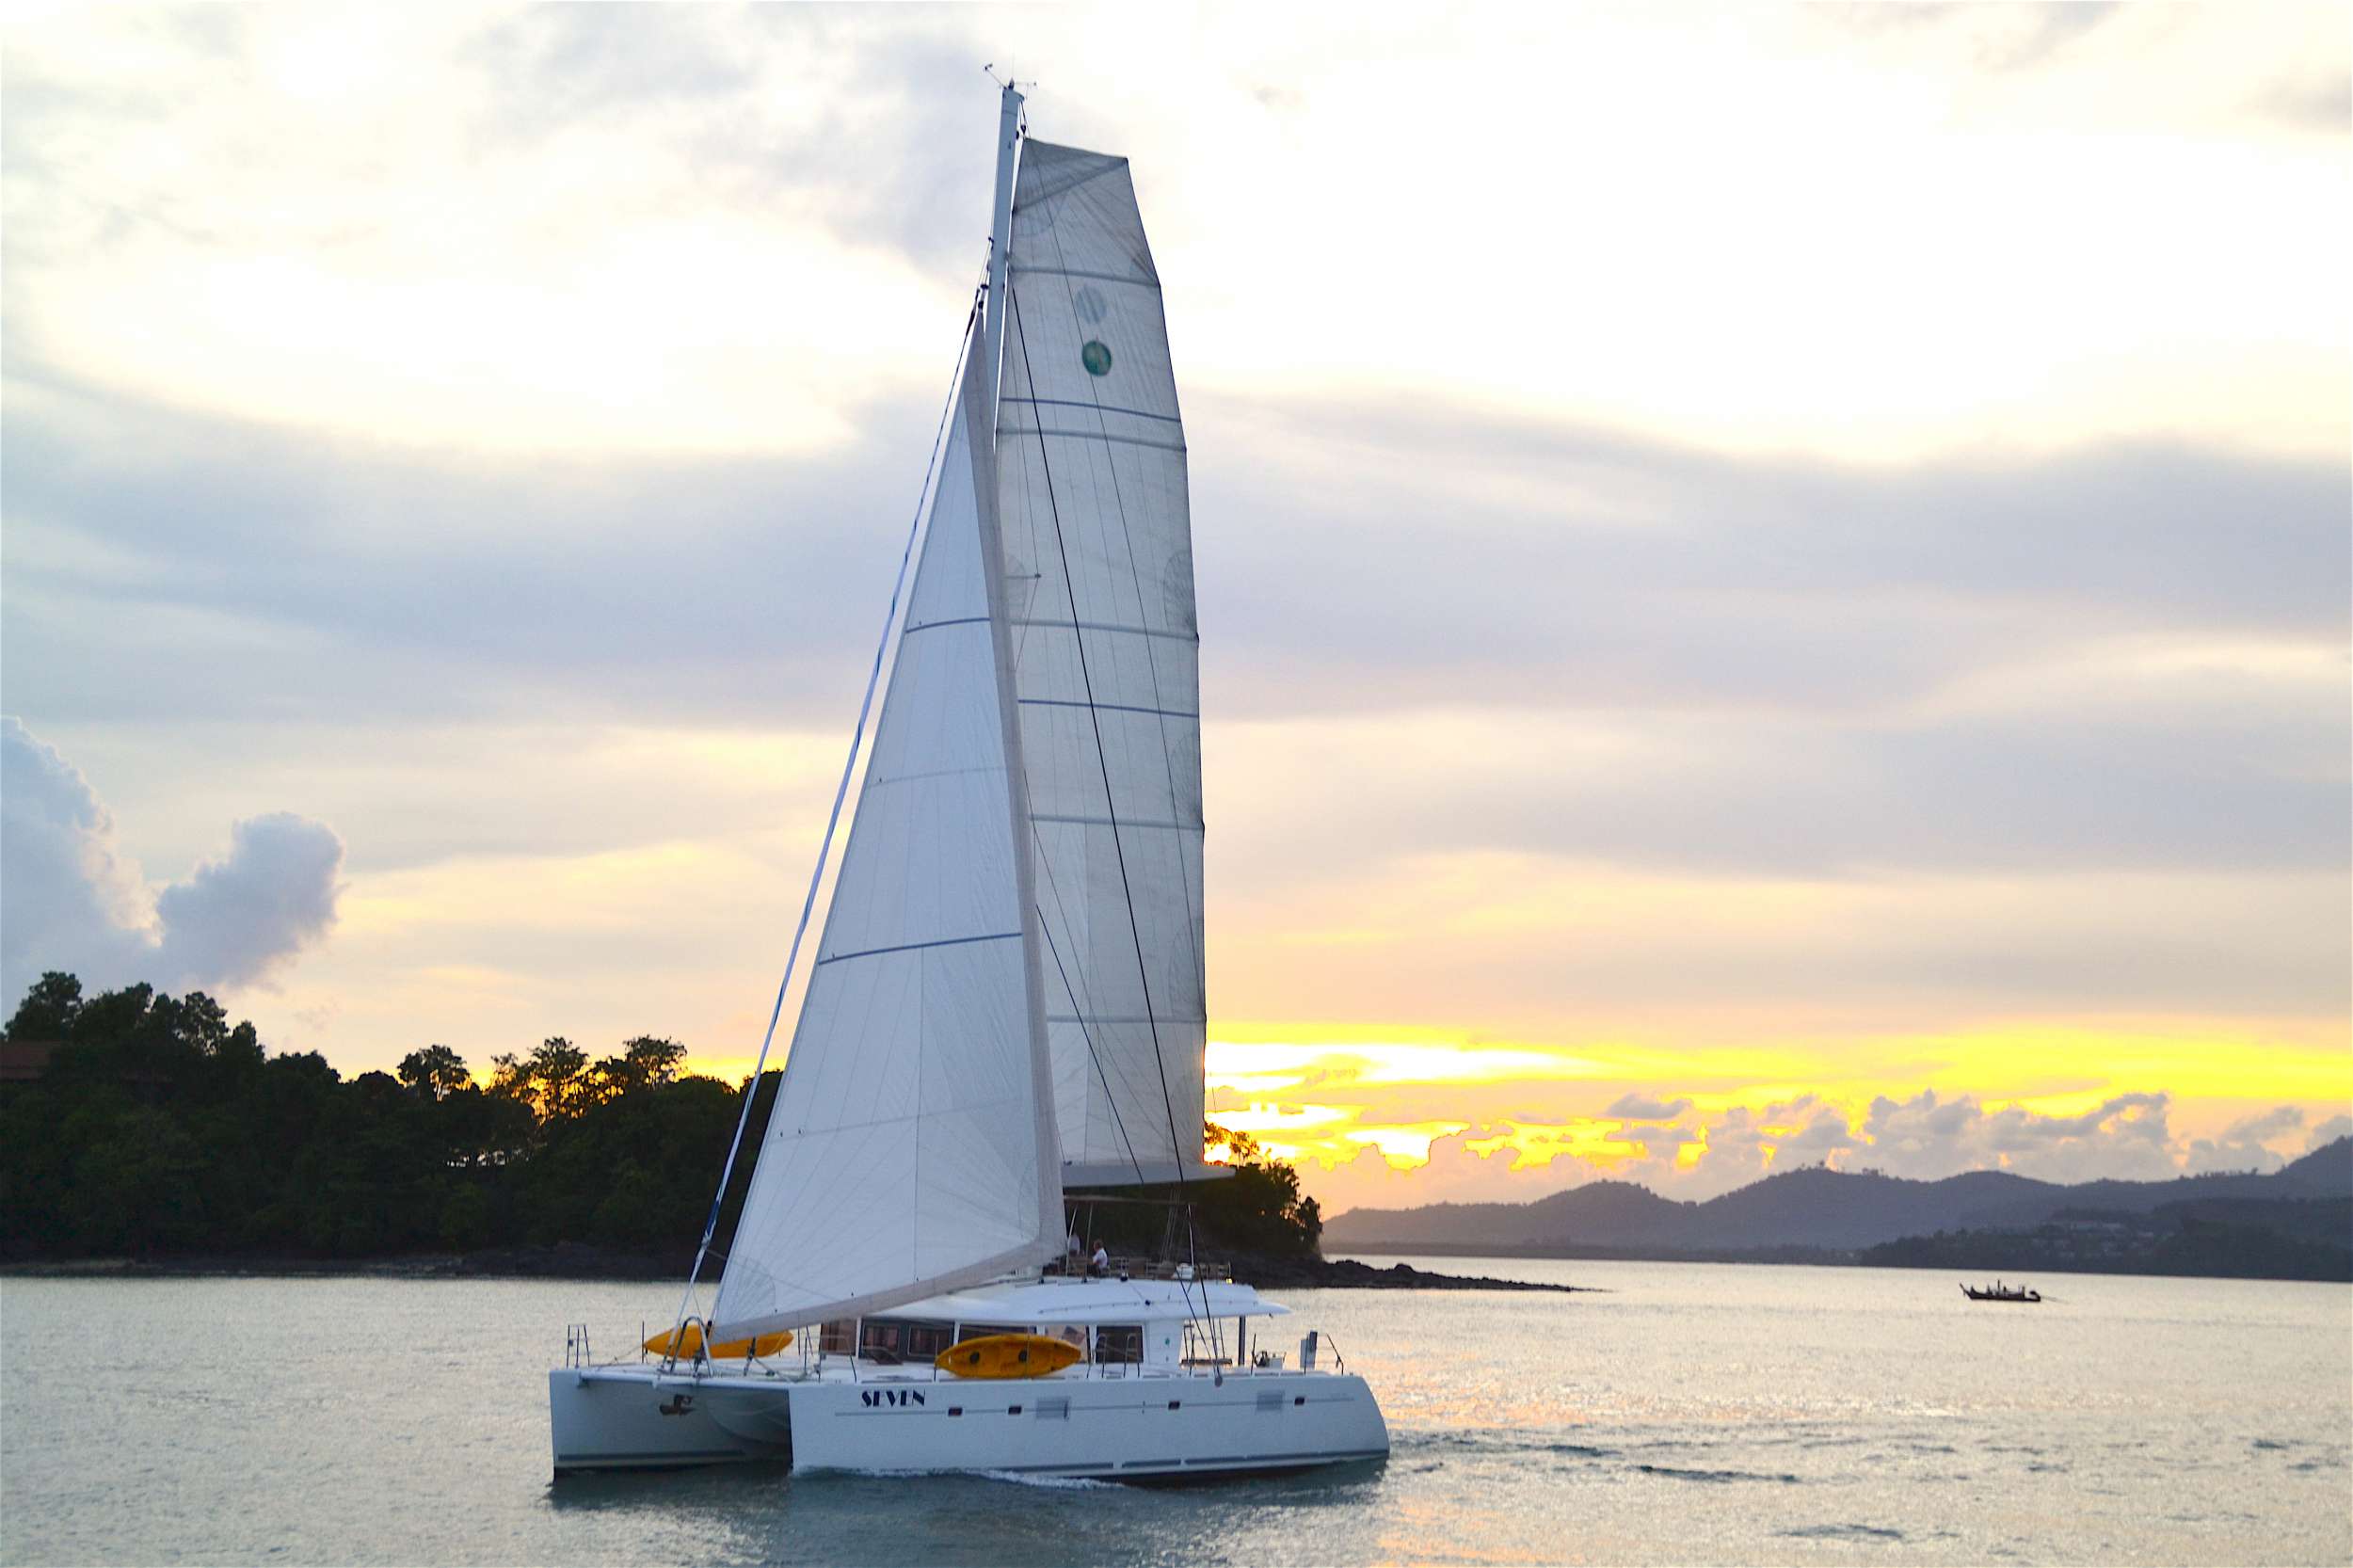 00SEVEN - Yacht Charter Thailand & Boat hire in SE Asia 2